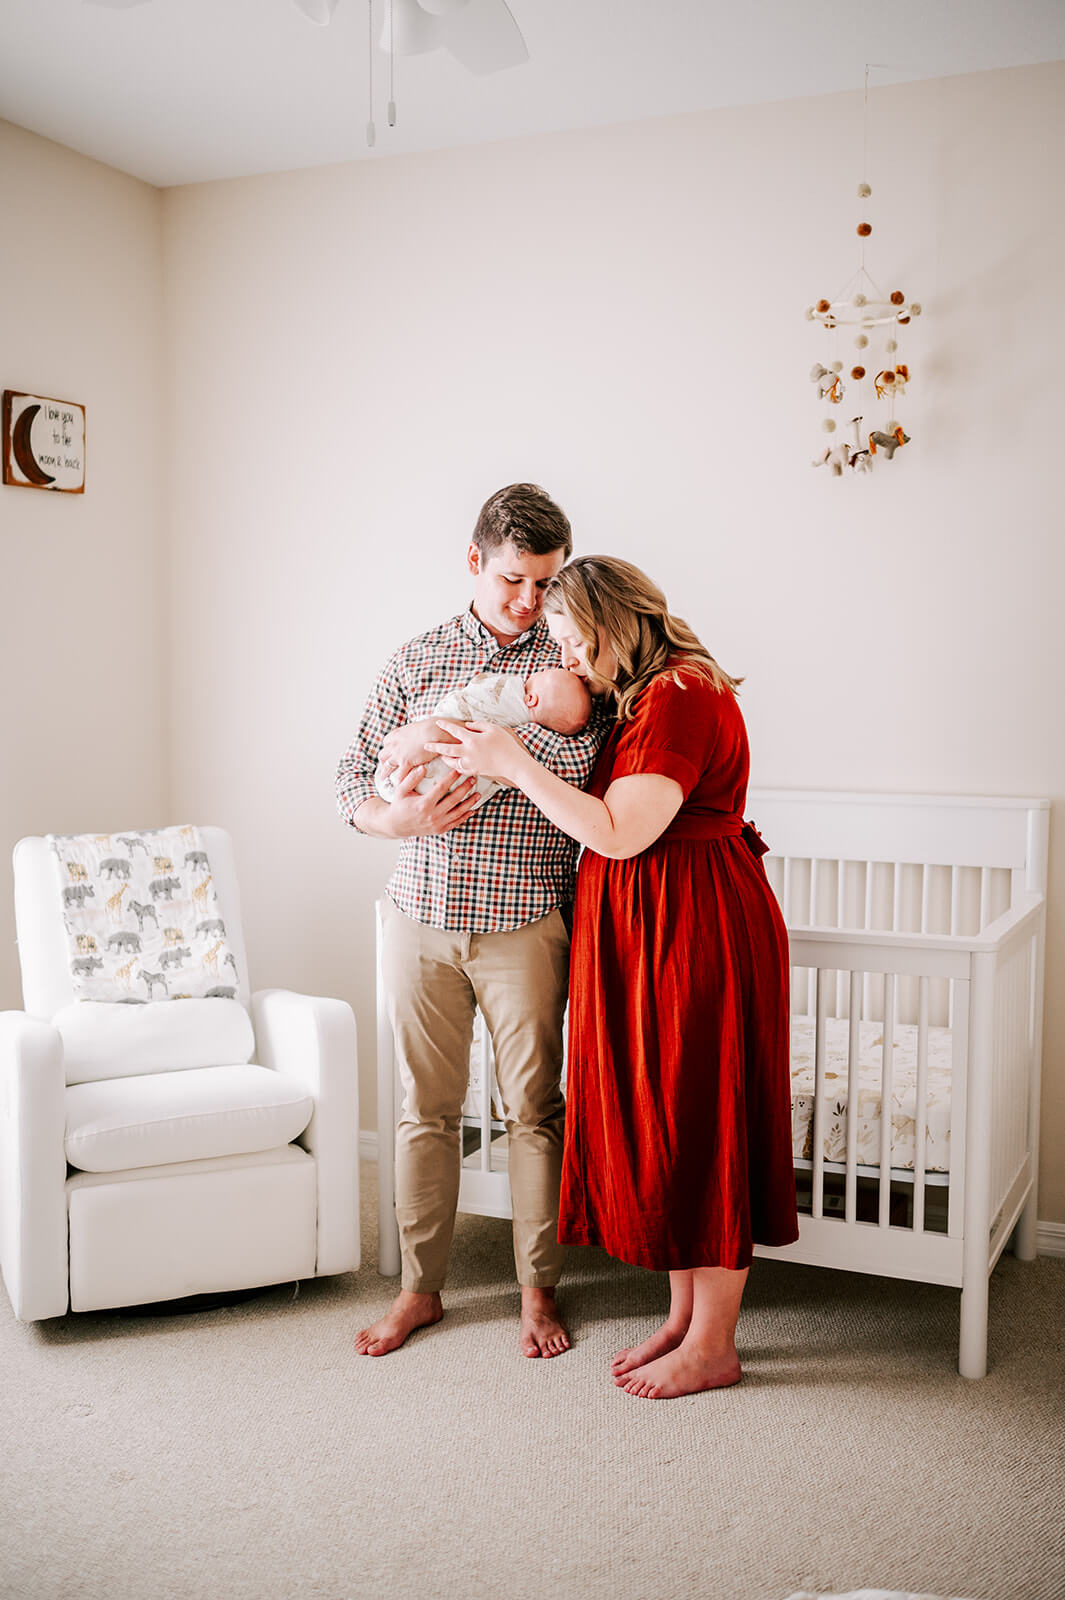 A mother in a red dress kisses her sleeping newborn baby in dad's arms while standing in a nursery